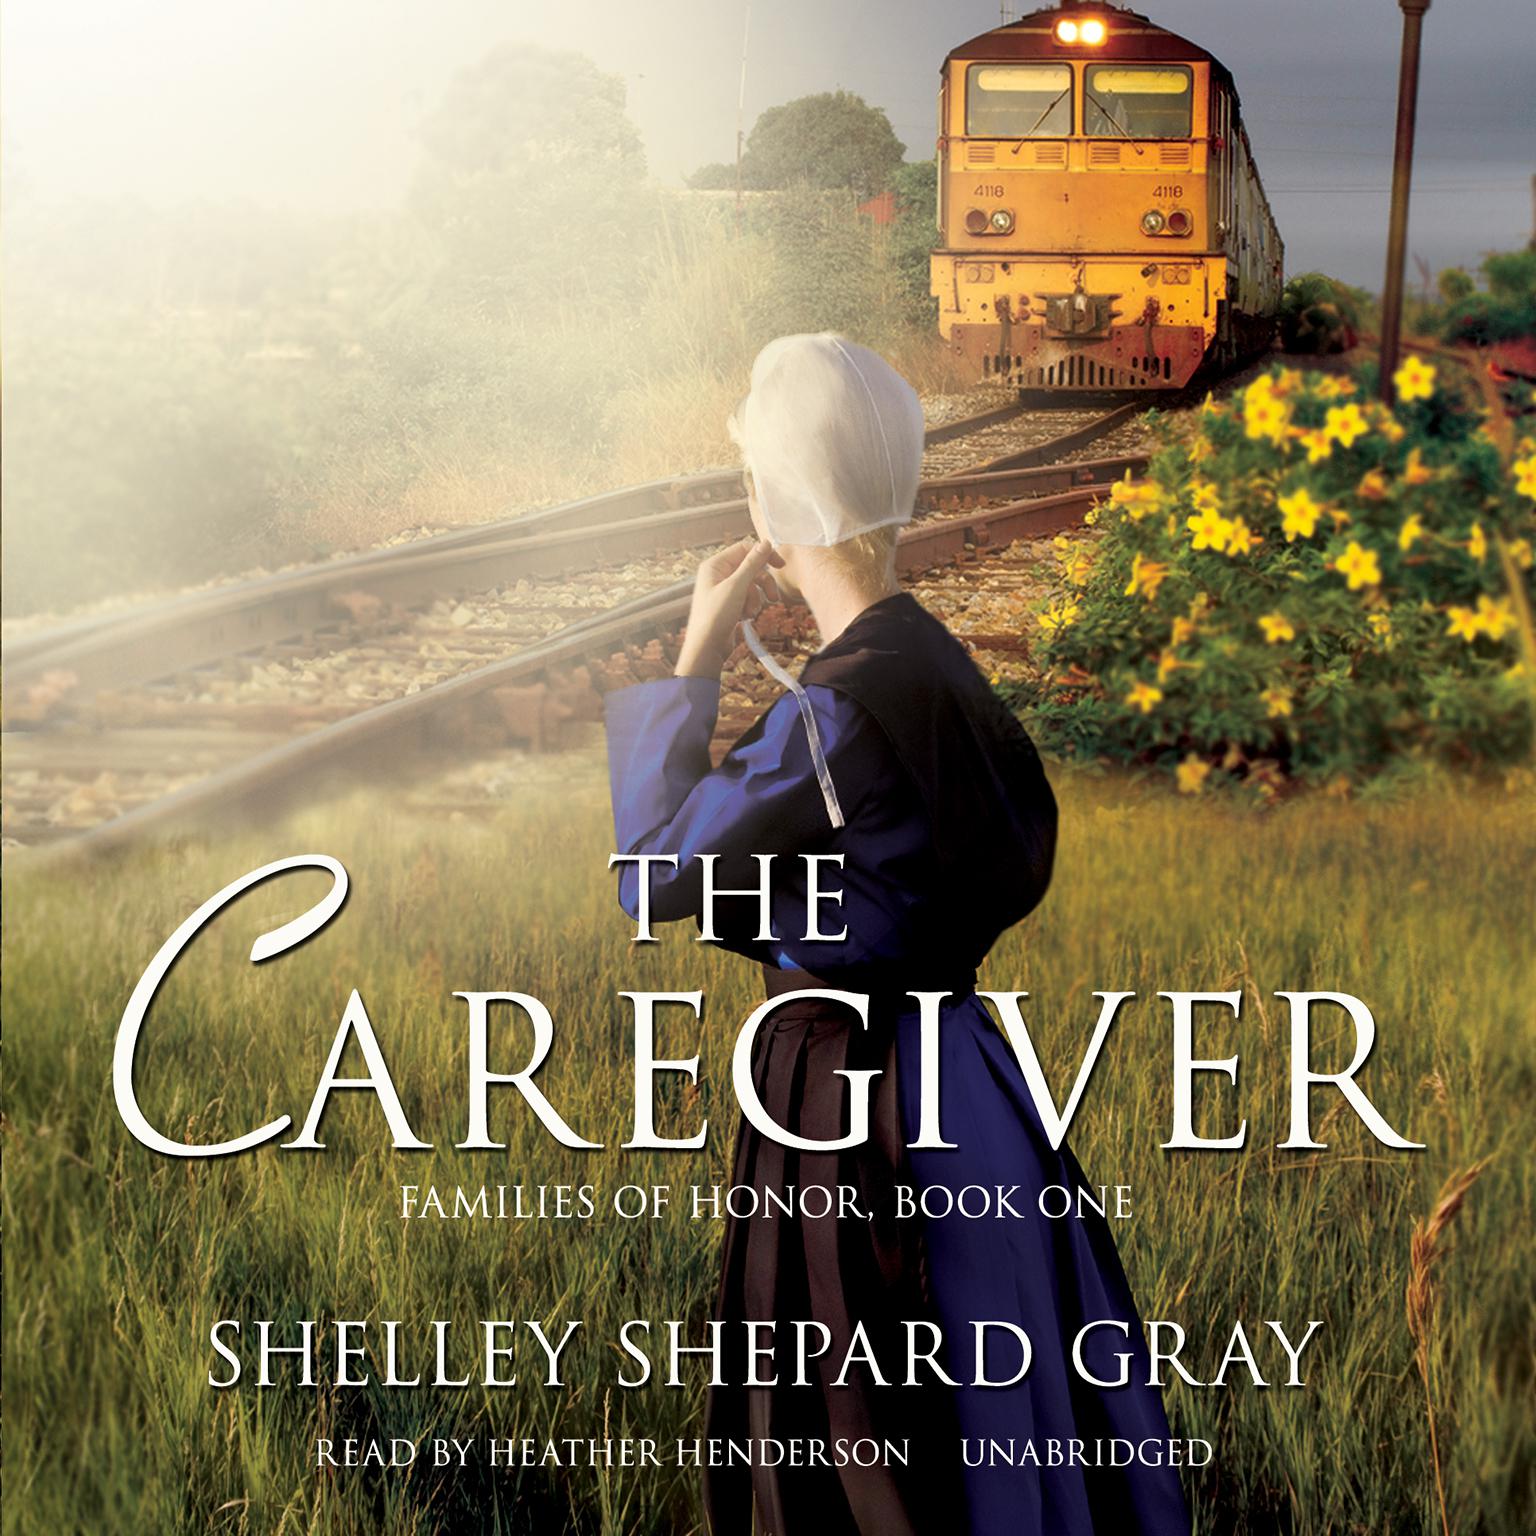 The Caregiver: Families of Honor, Book One Audiobook, by Shelley Shepard Gray